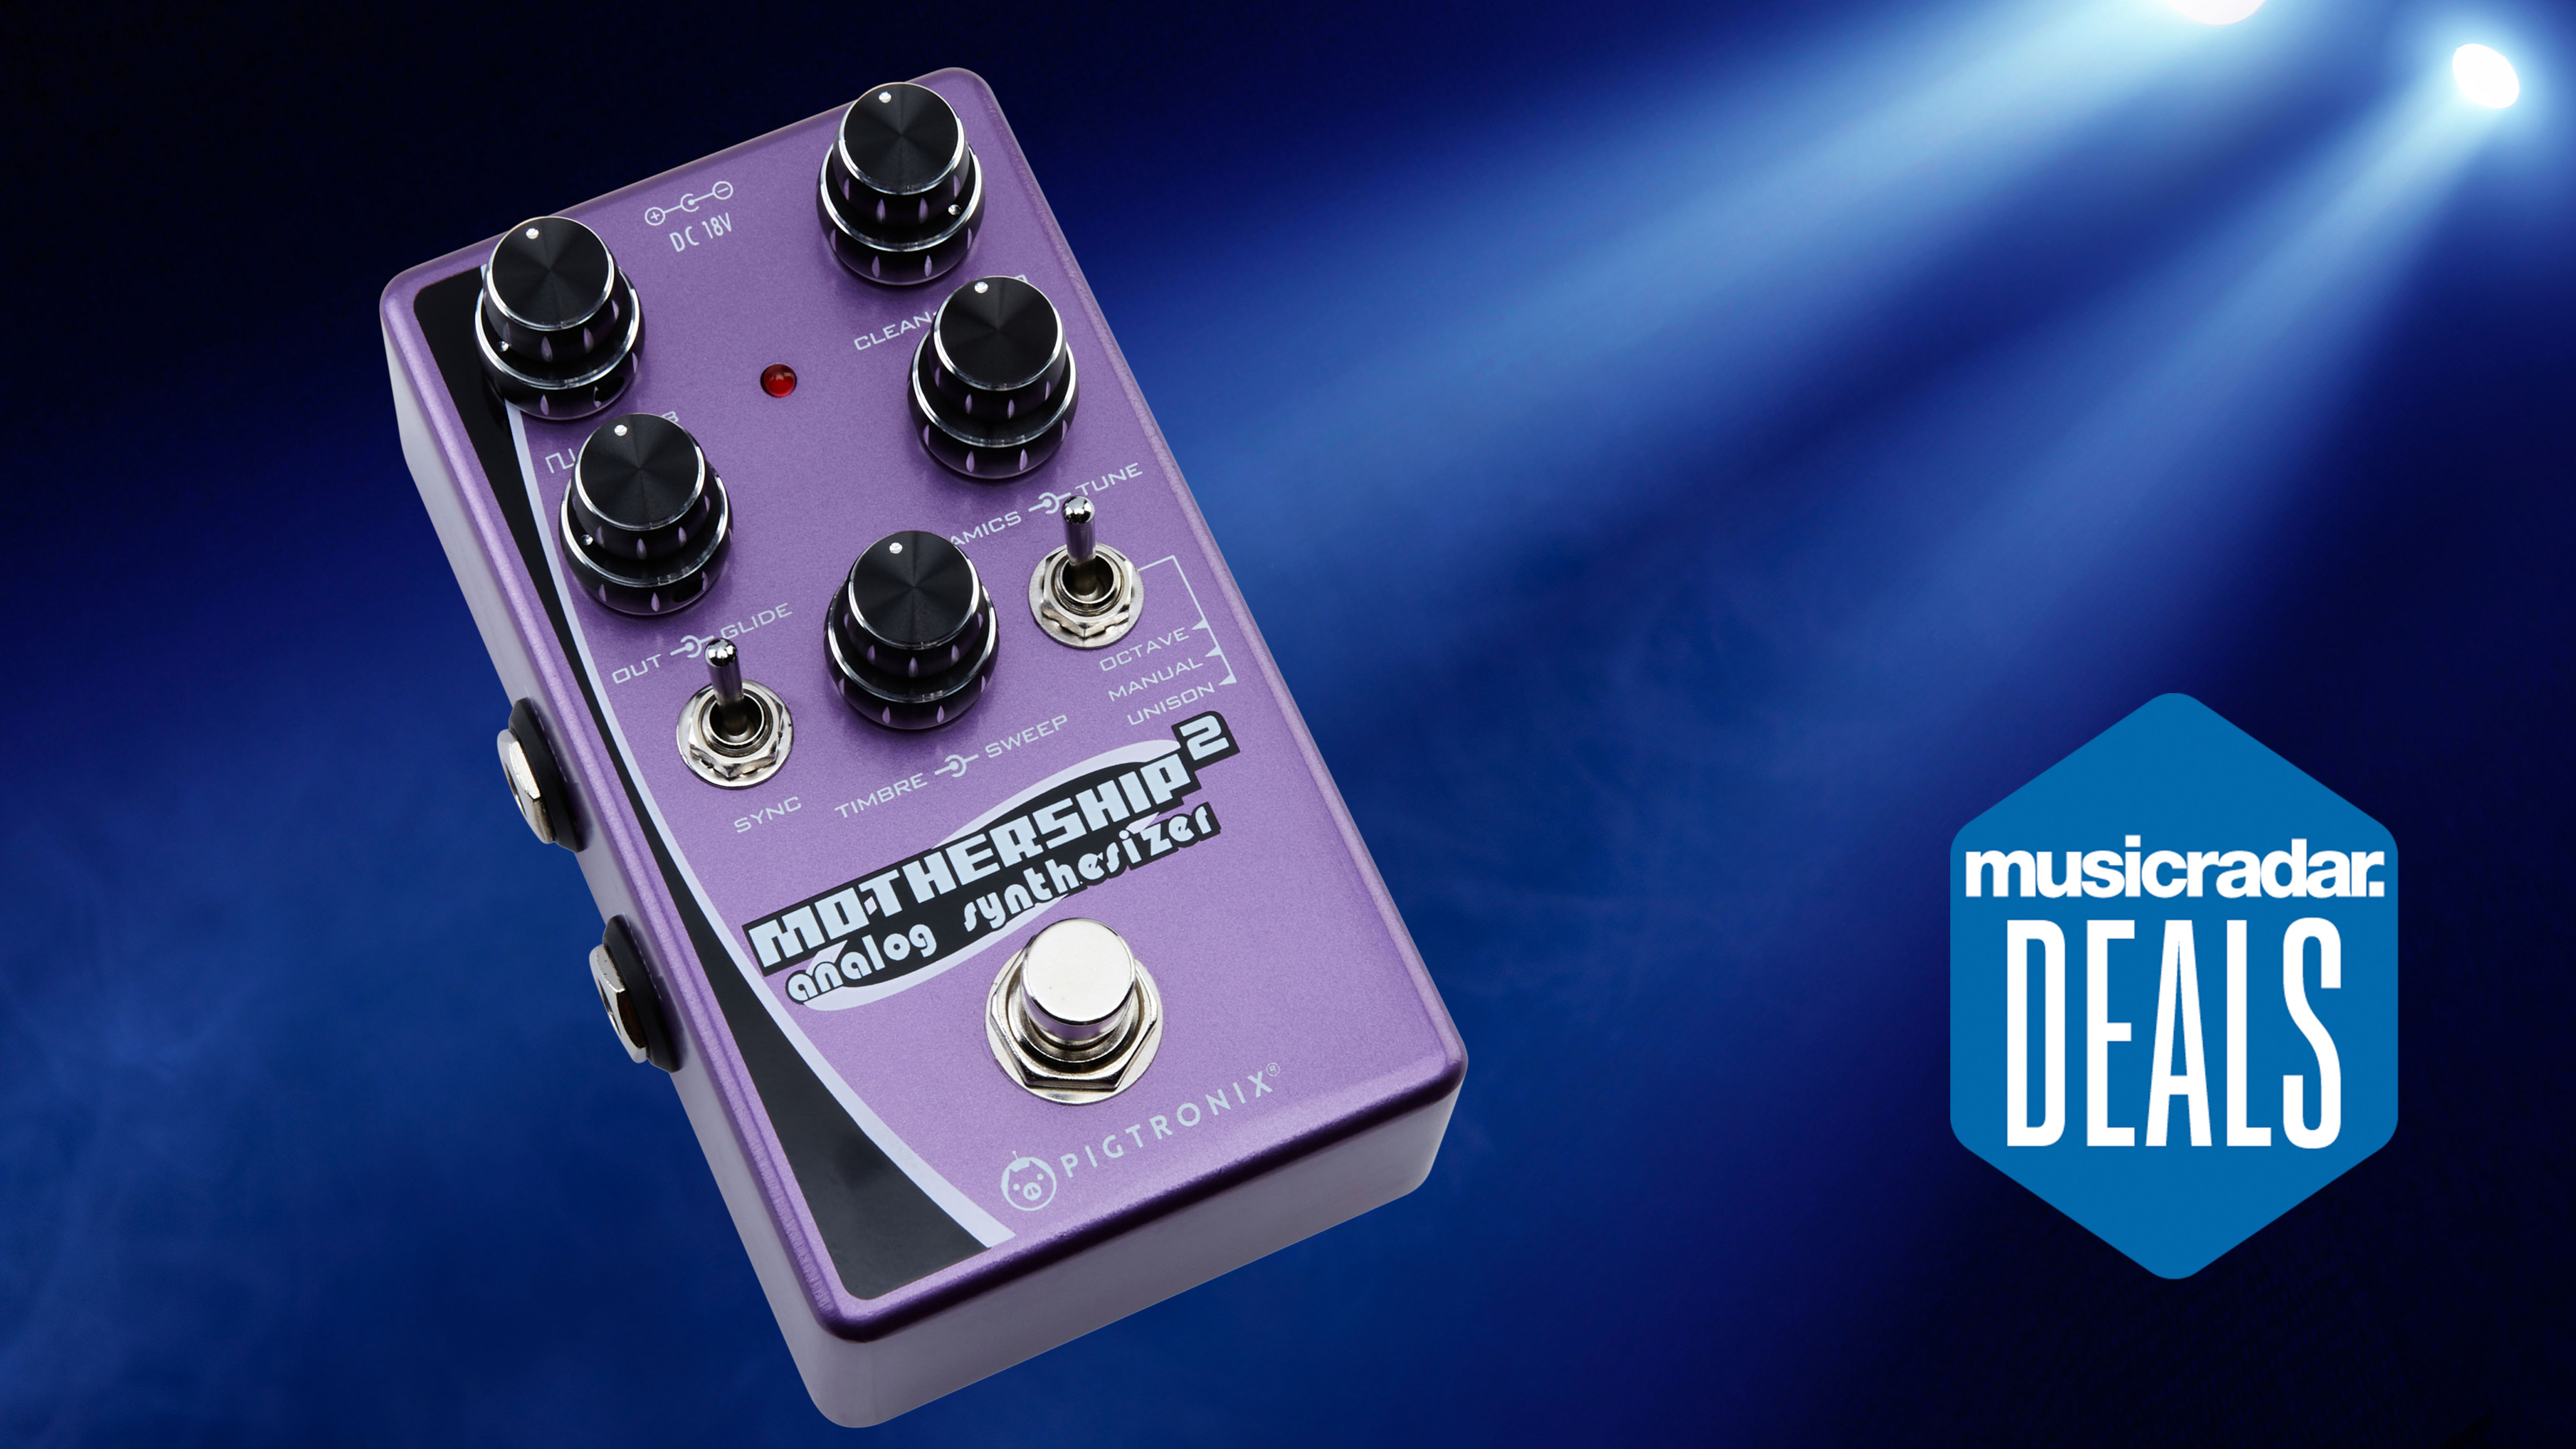 Launch your guitar effects potential with over $120 off the